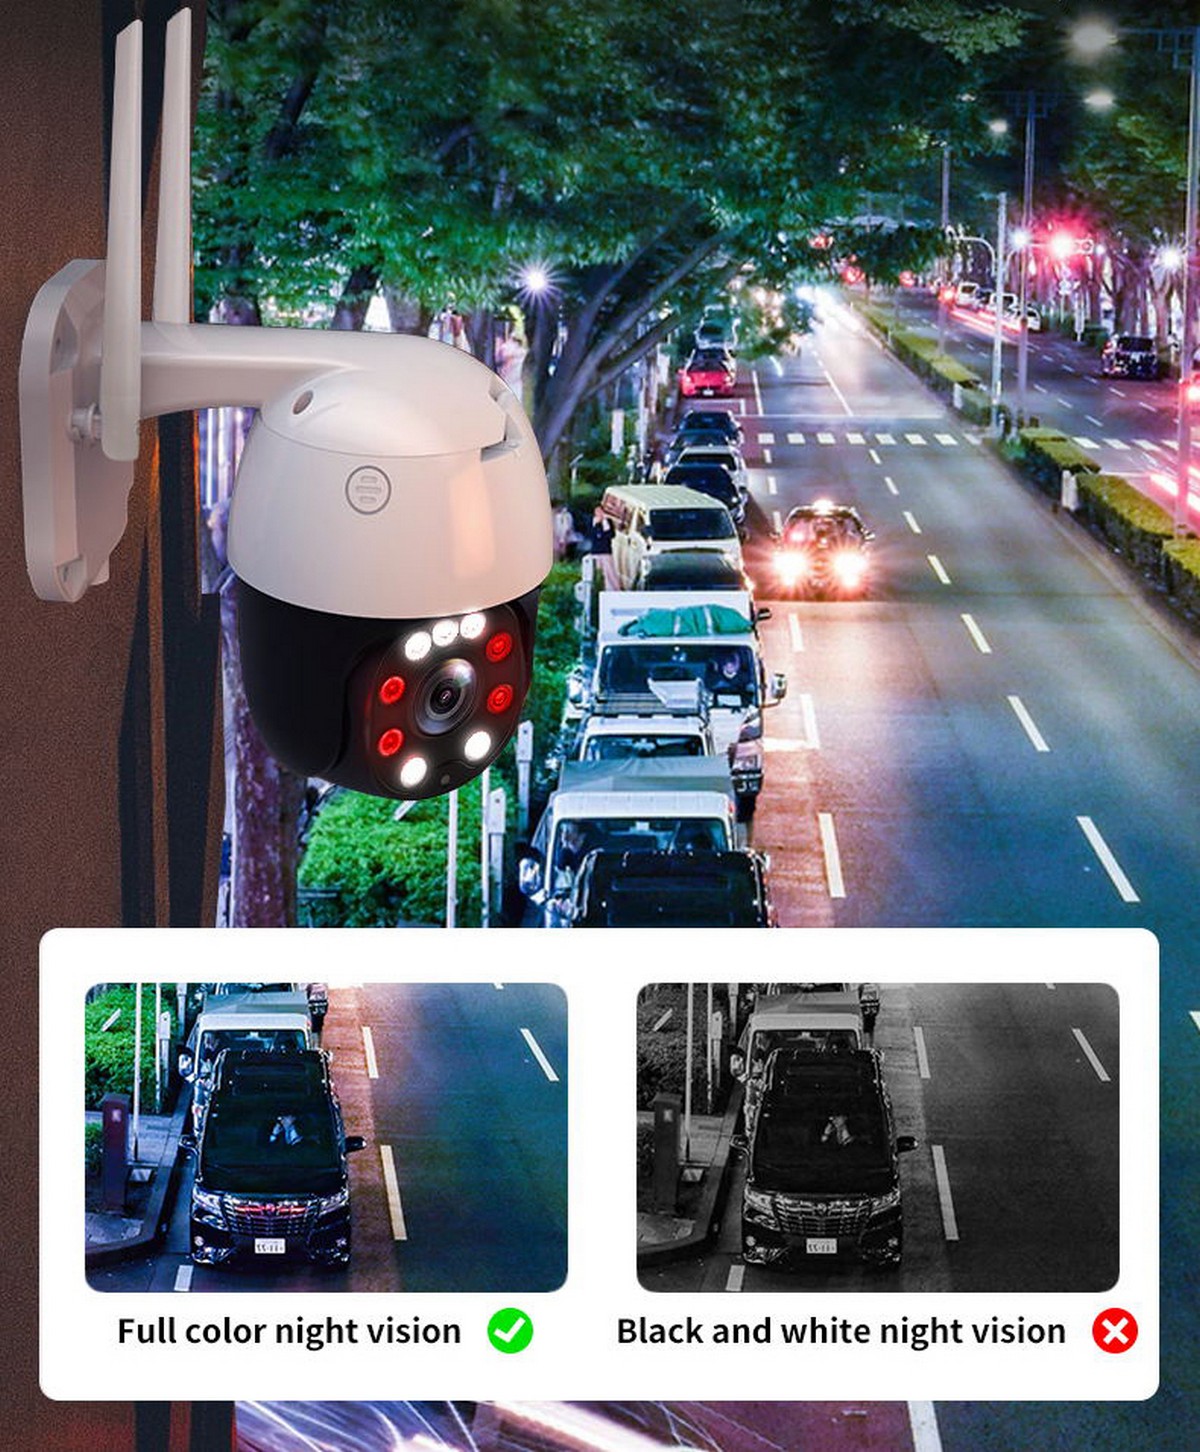 full-color colorful night vision ip camera on a house